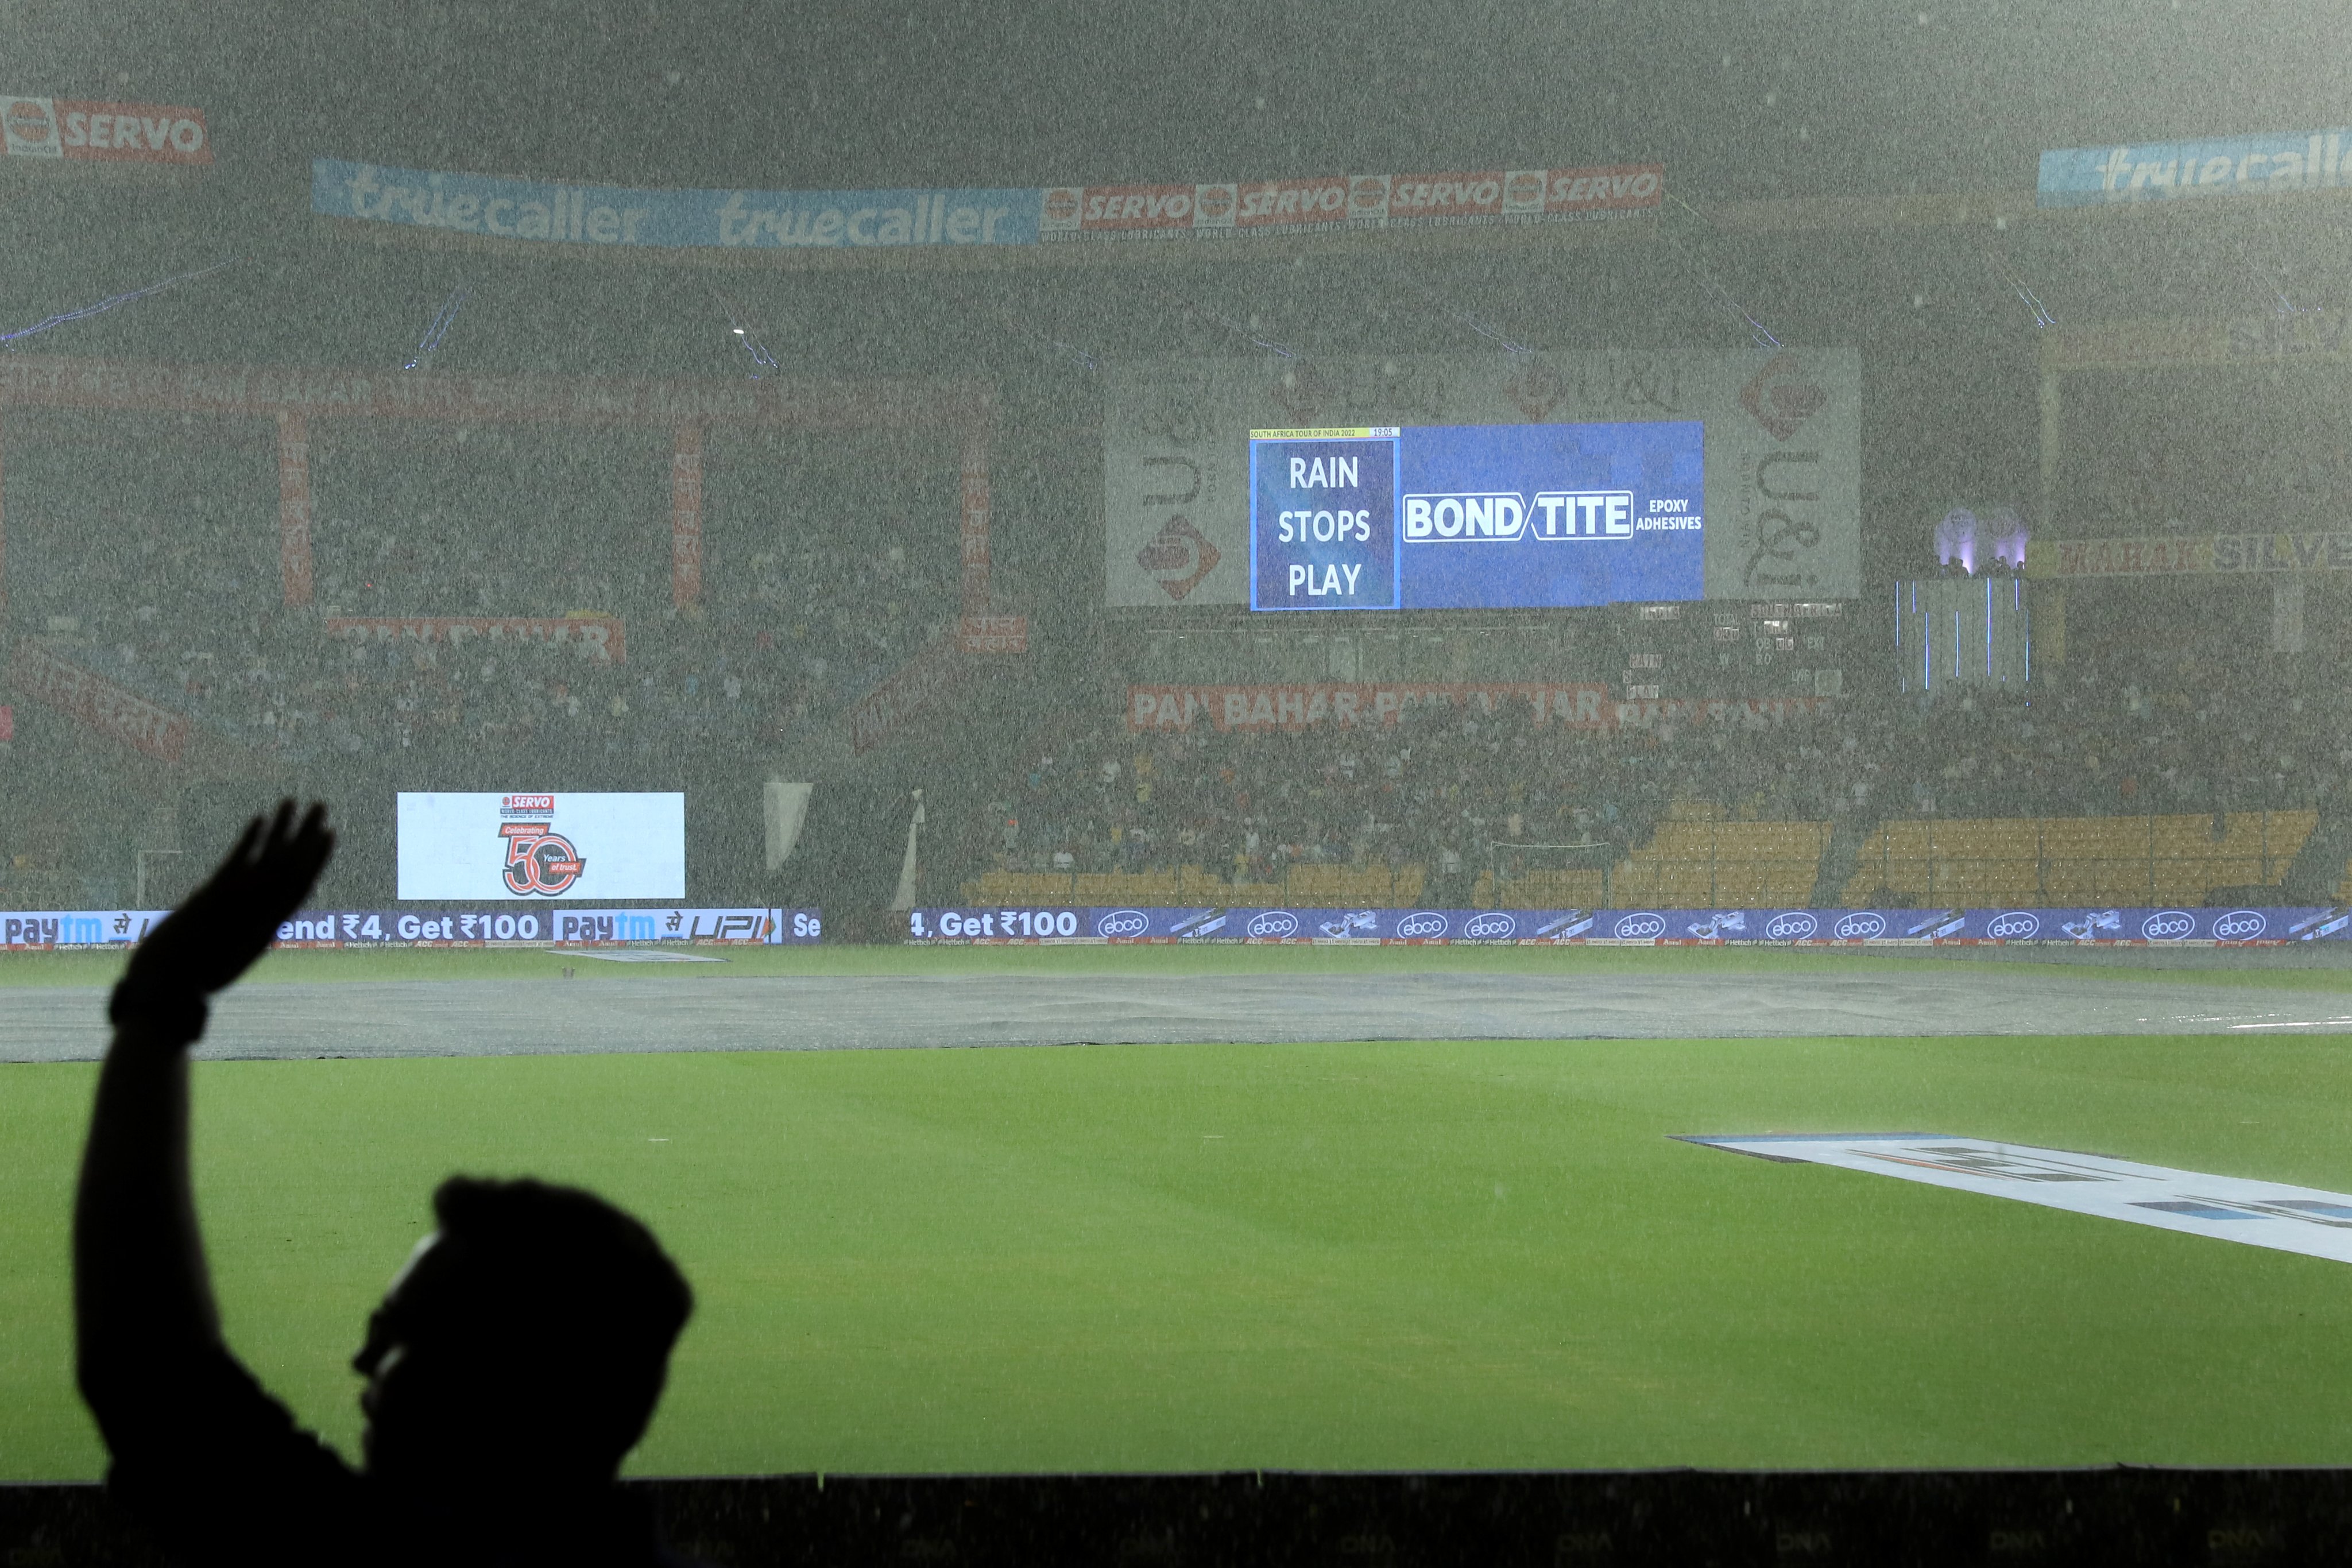  IND vs SA 5th T20: Match called off after rain plays spoilsport in Bangalore, series ends tied